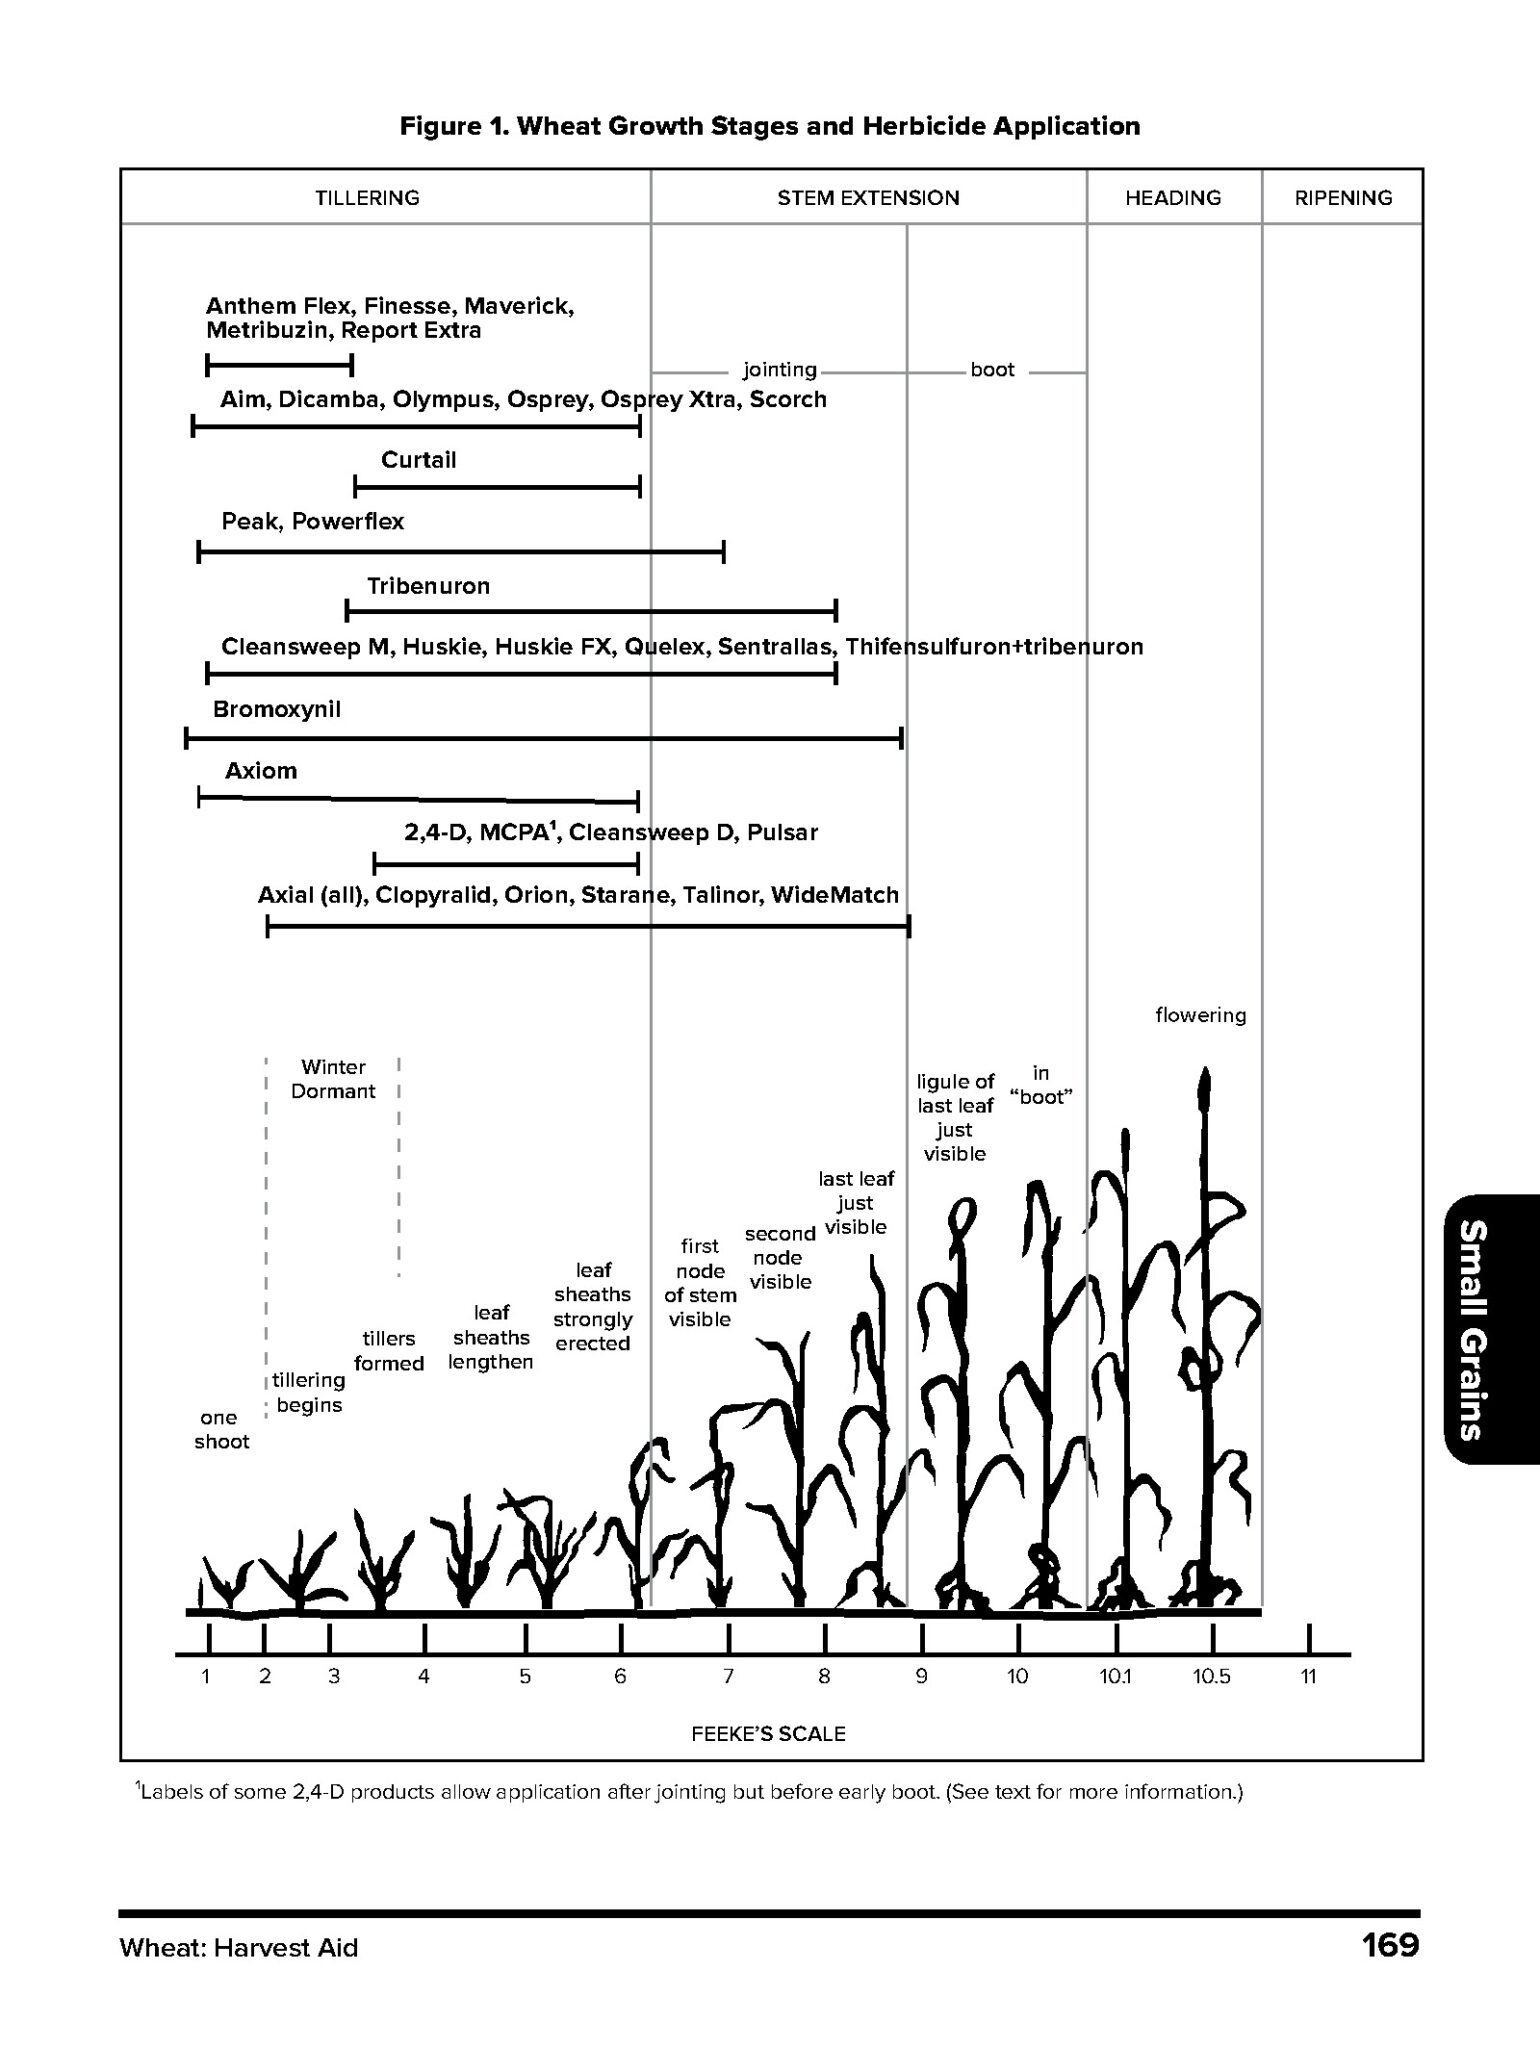 Figure 1. Feeke’s scale of winter wheat stages and herbicide application timings (Source: 2023 Weed Control Guide for Ohio, Indiana, and Illinois).